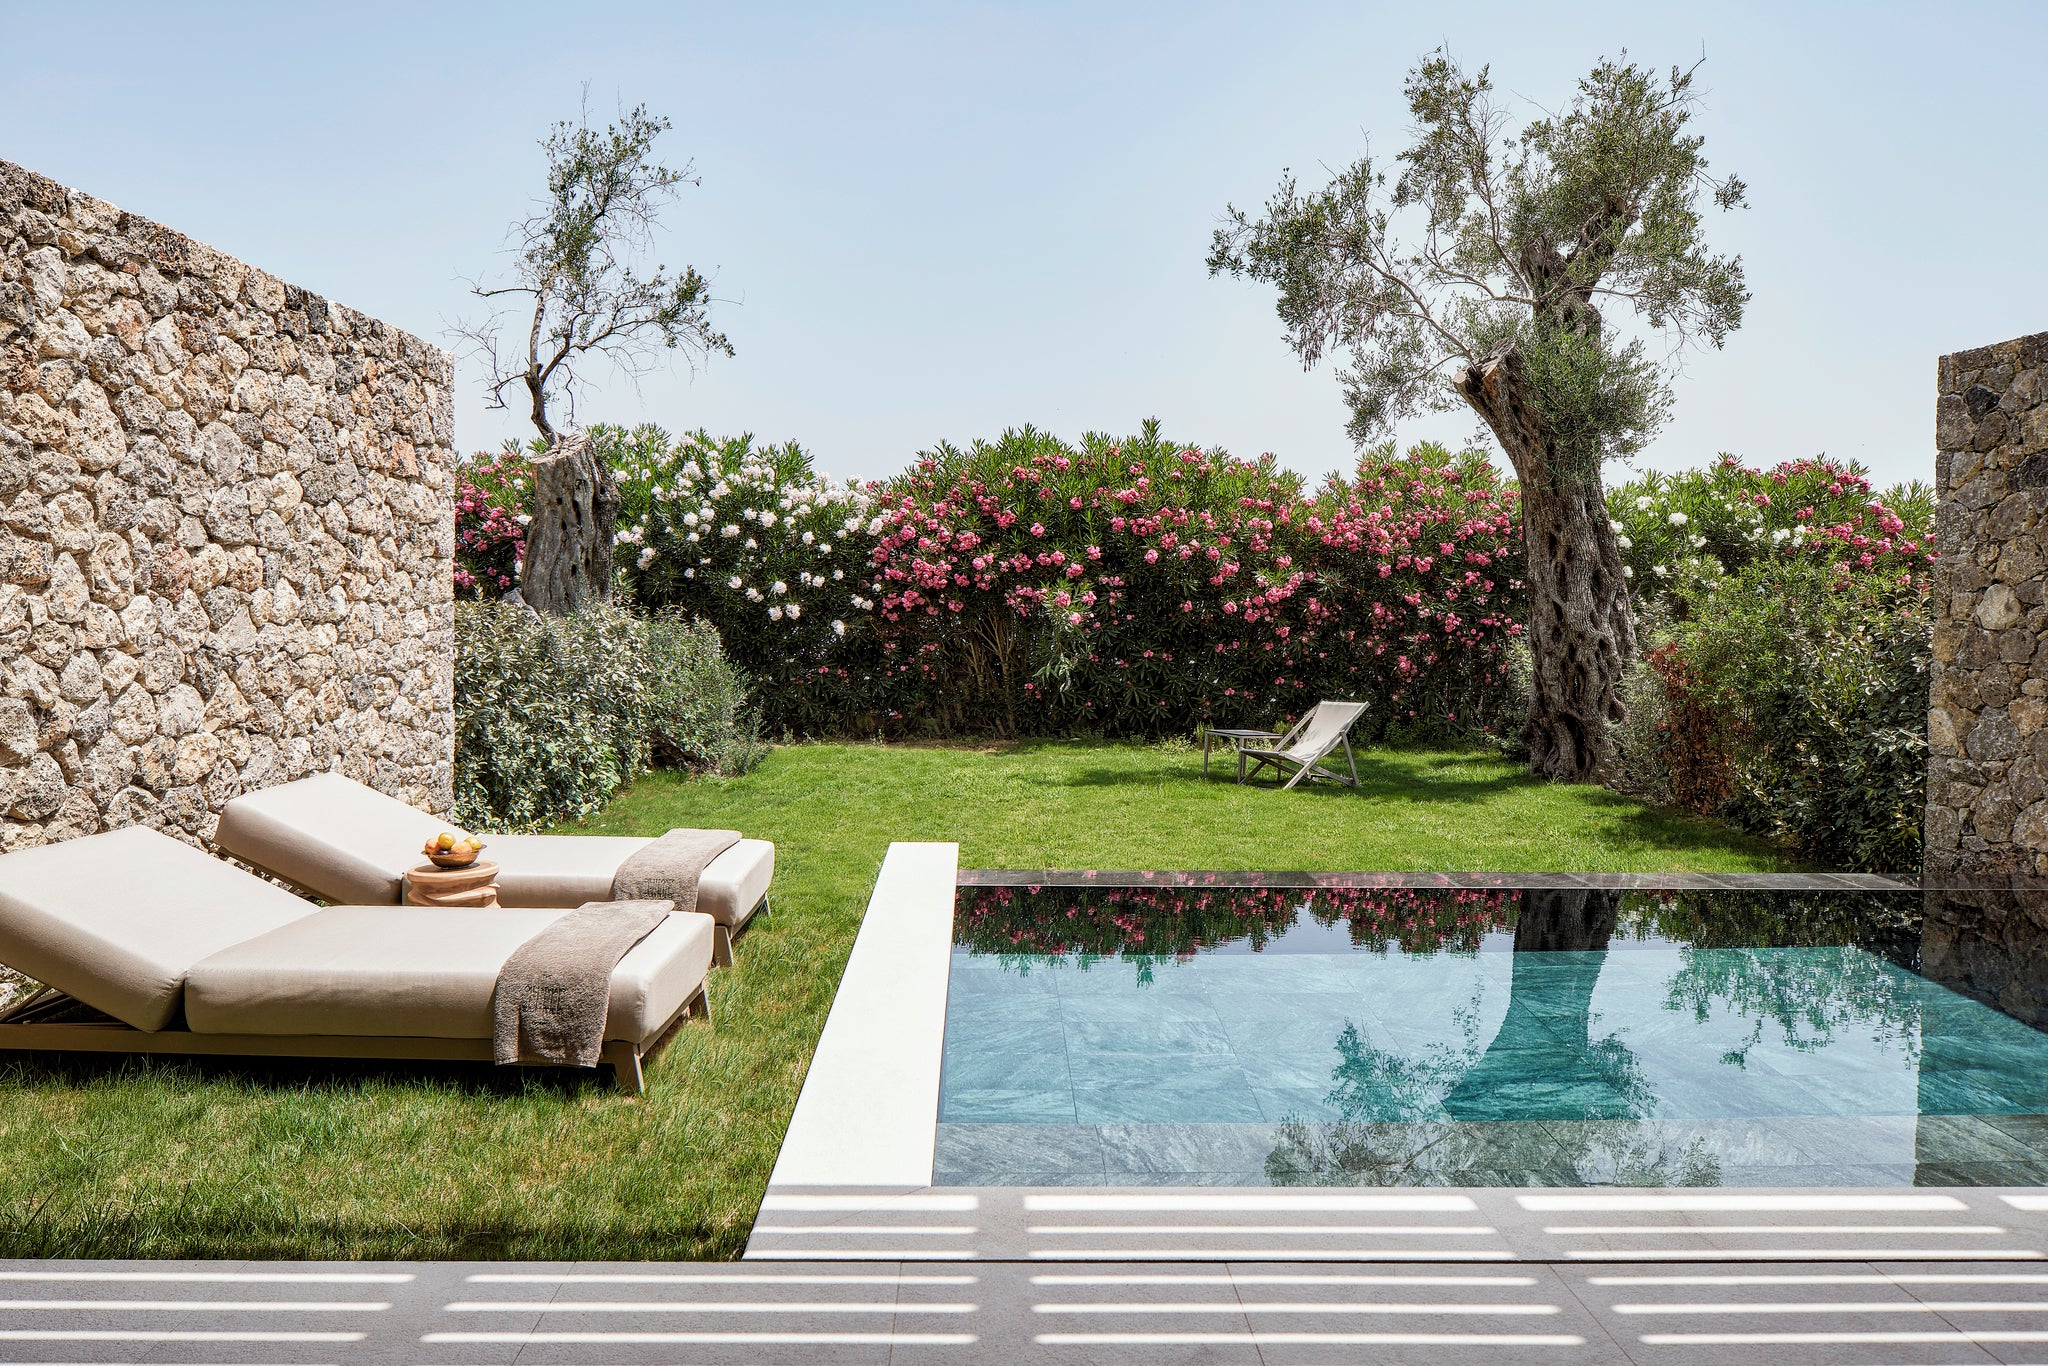 Enjoy a secluded stay surrounded by olive groves at Corfu’s Olivar Suites resort